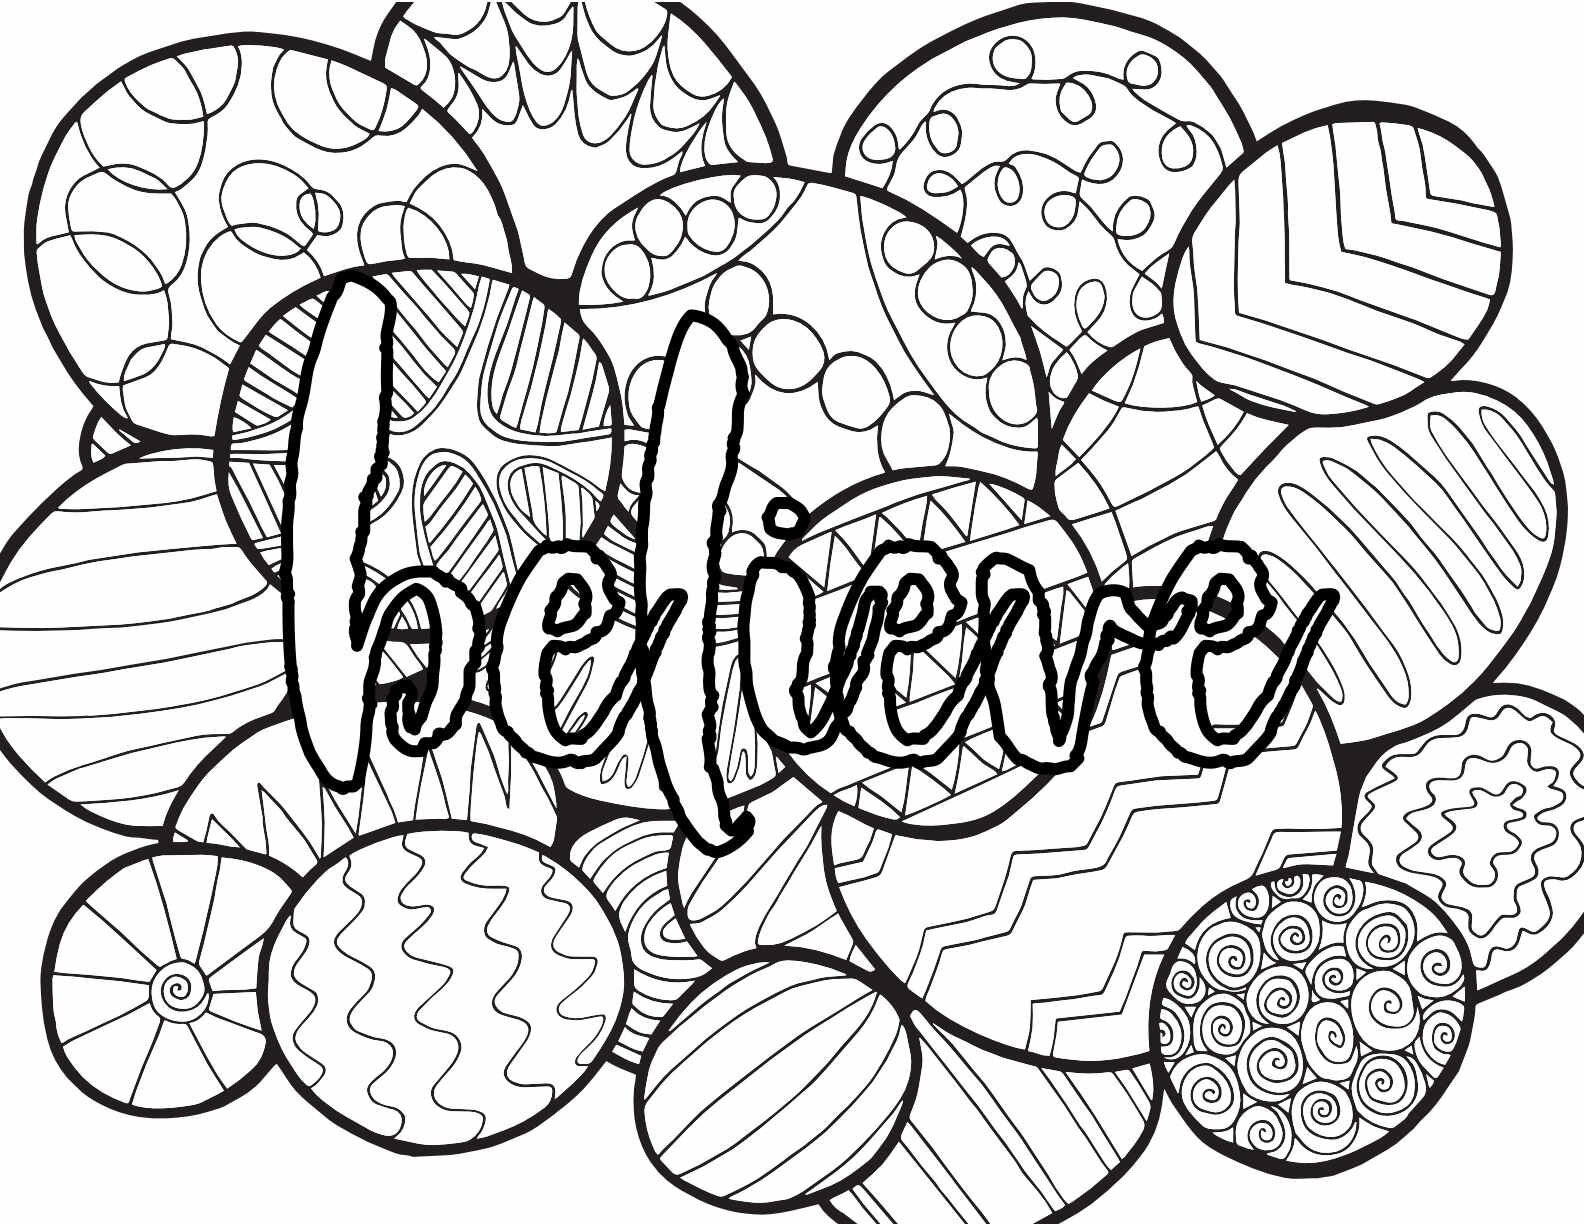 3 FREE BELIEVE PRINTABLE COLORING PAGES CLICK HERE TO DOWNLOAD THE PAGE ABOVE